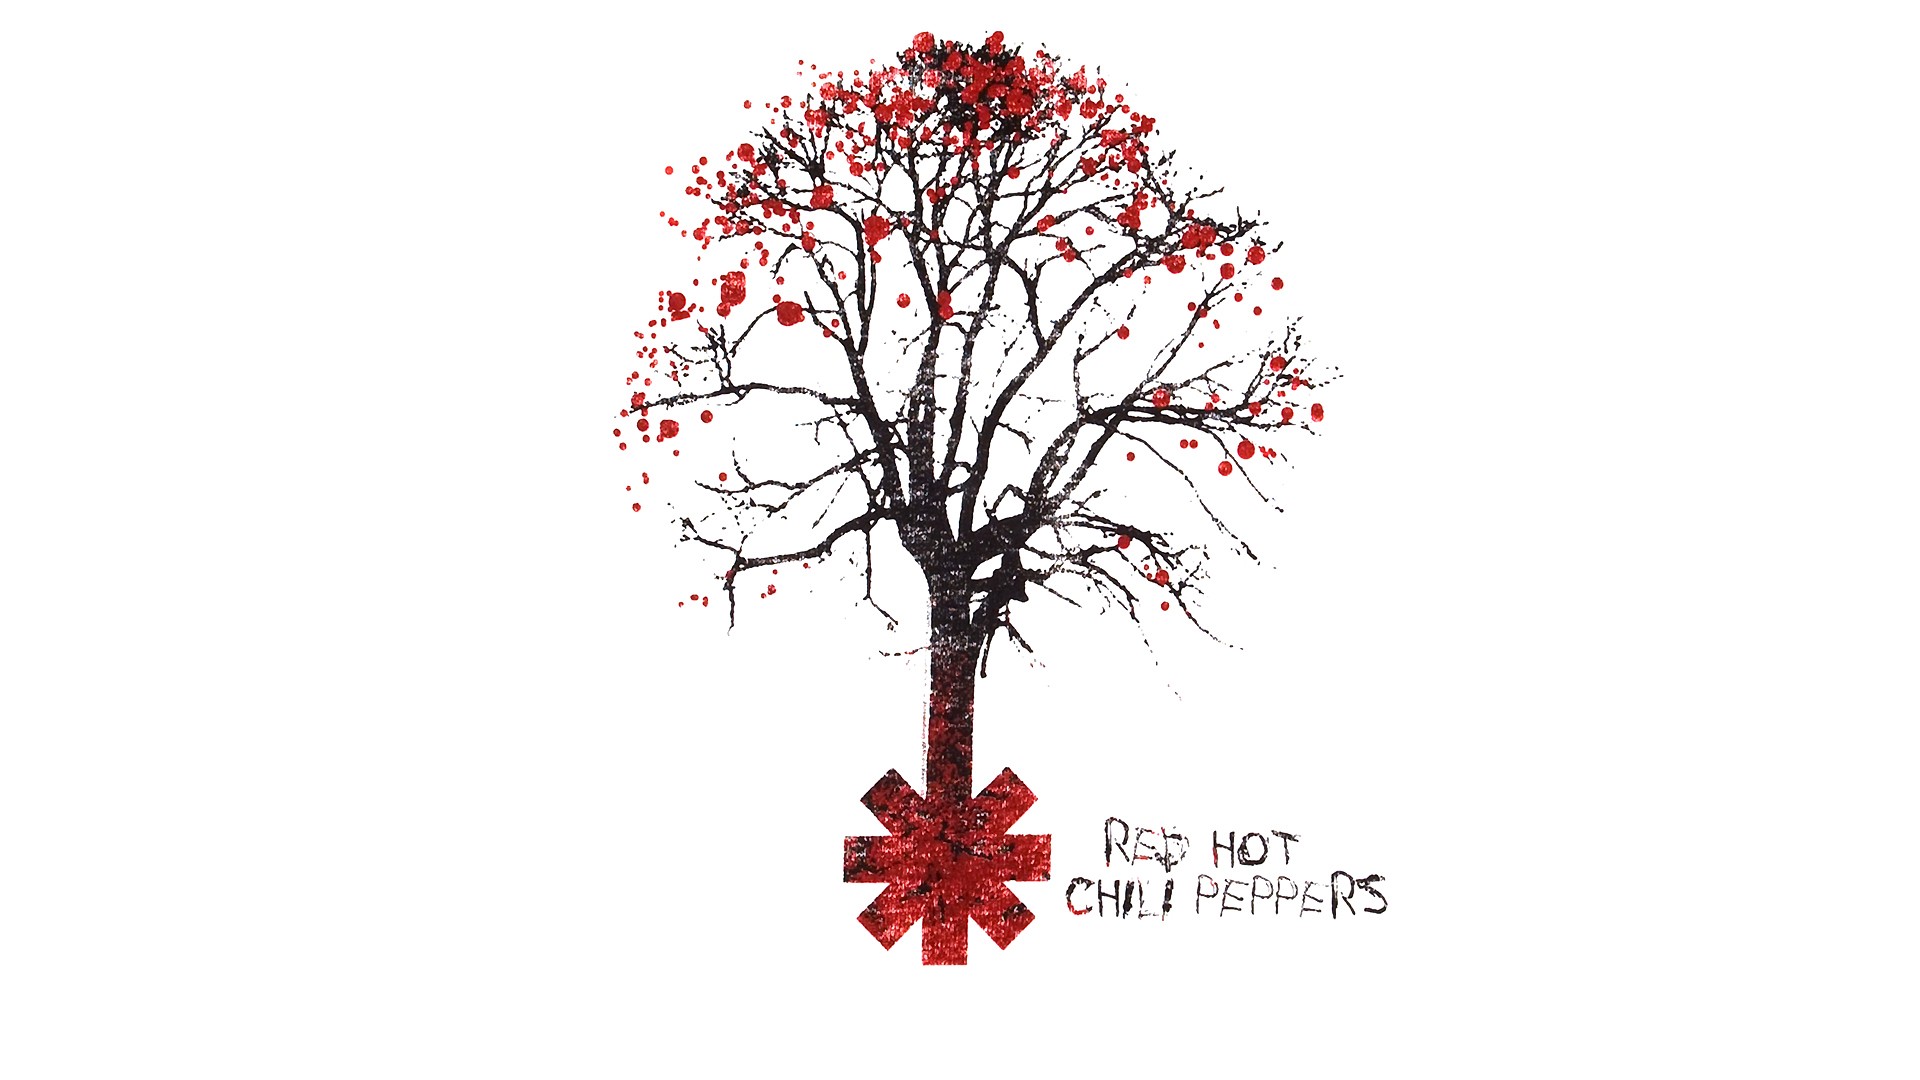 General 1920x1080 Red Hot Chili Peppers music simple background red white trees artwork band